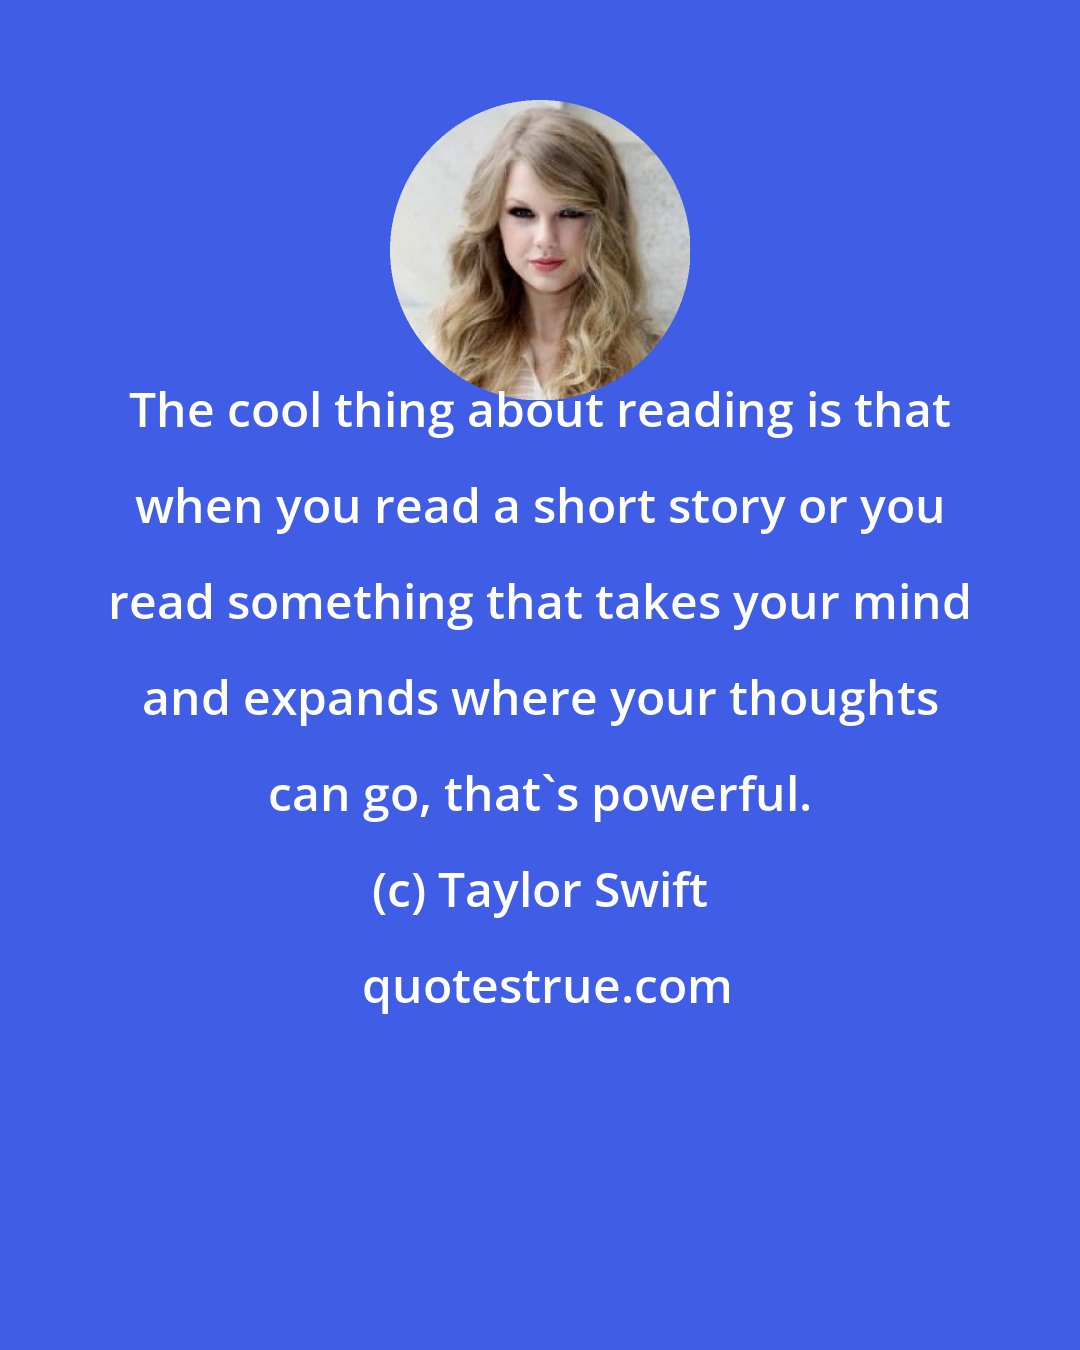 Taylor Swift: The cool thing about reading is that when you read a short story or you read something that takes your mind and expands where your thoughts can go, that's powerful.